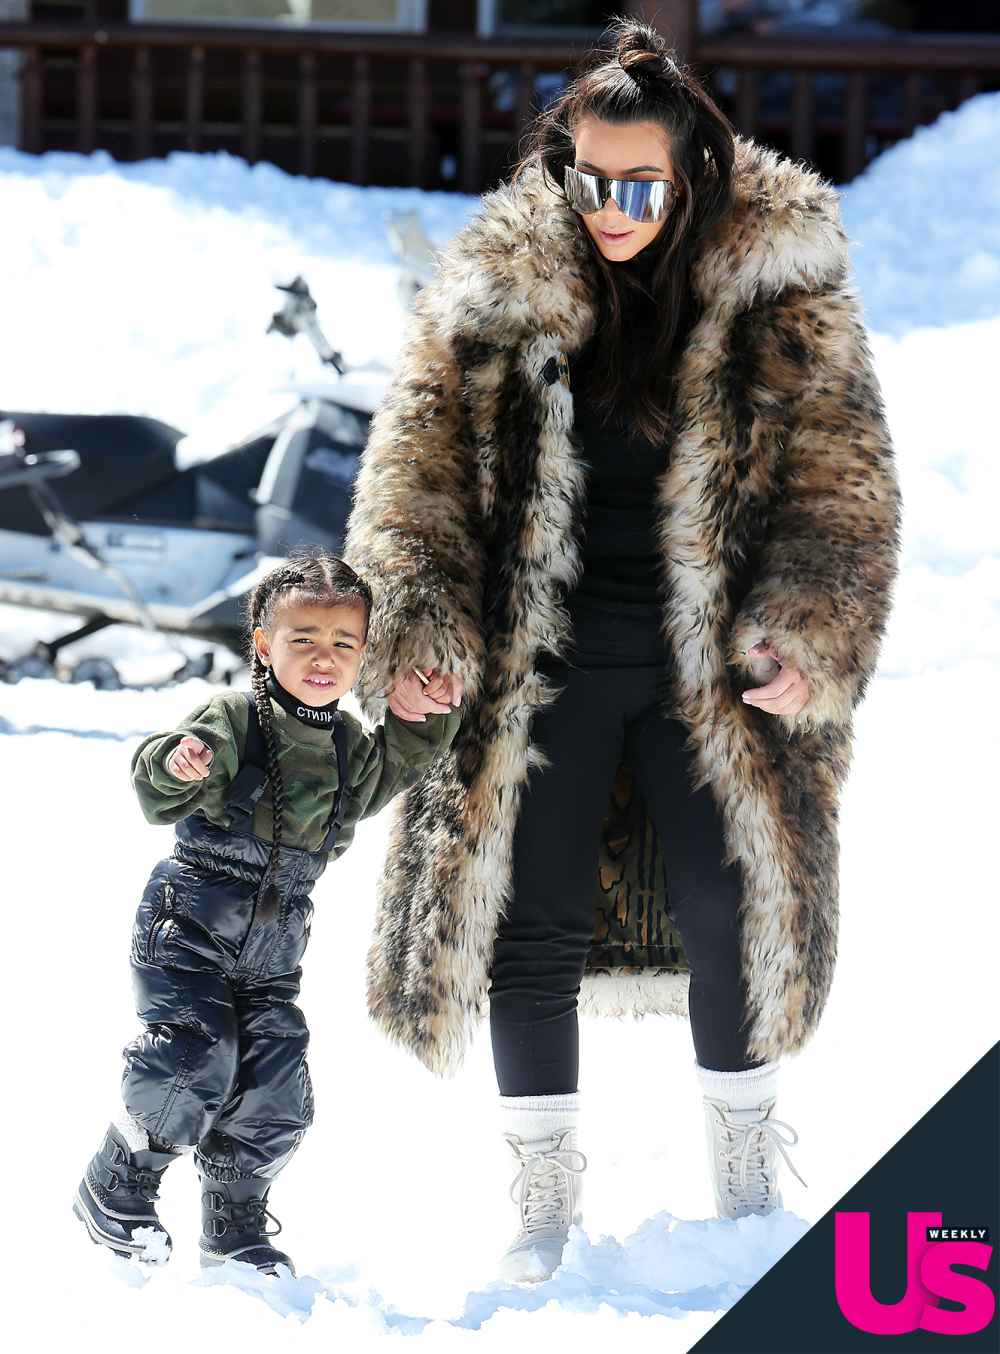 Kim Kardashian and North West in Vail, CO, on April 6, 2016.